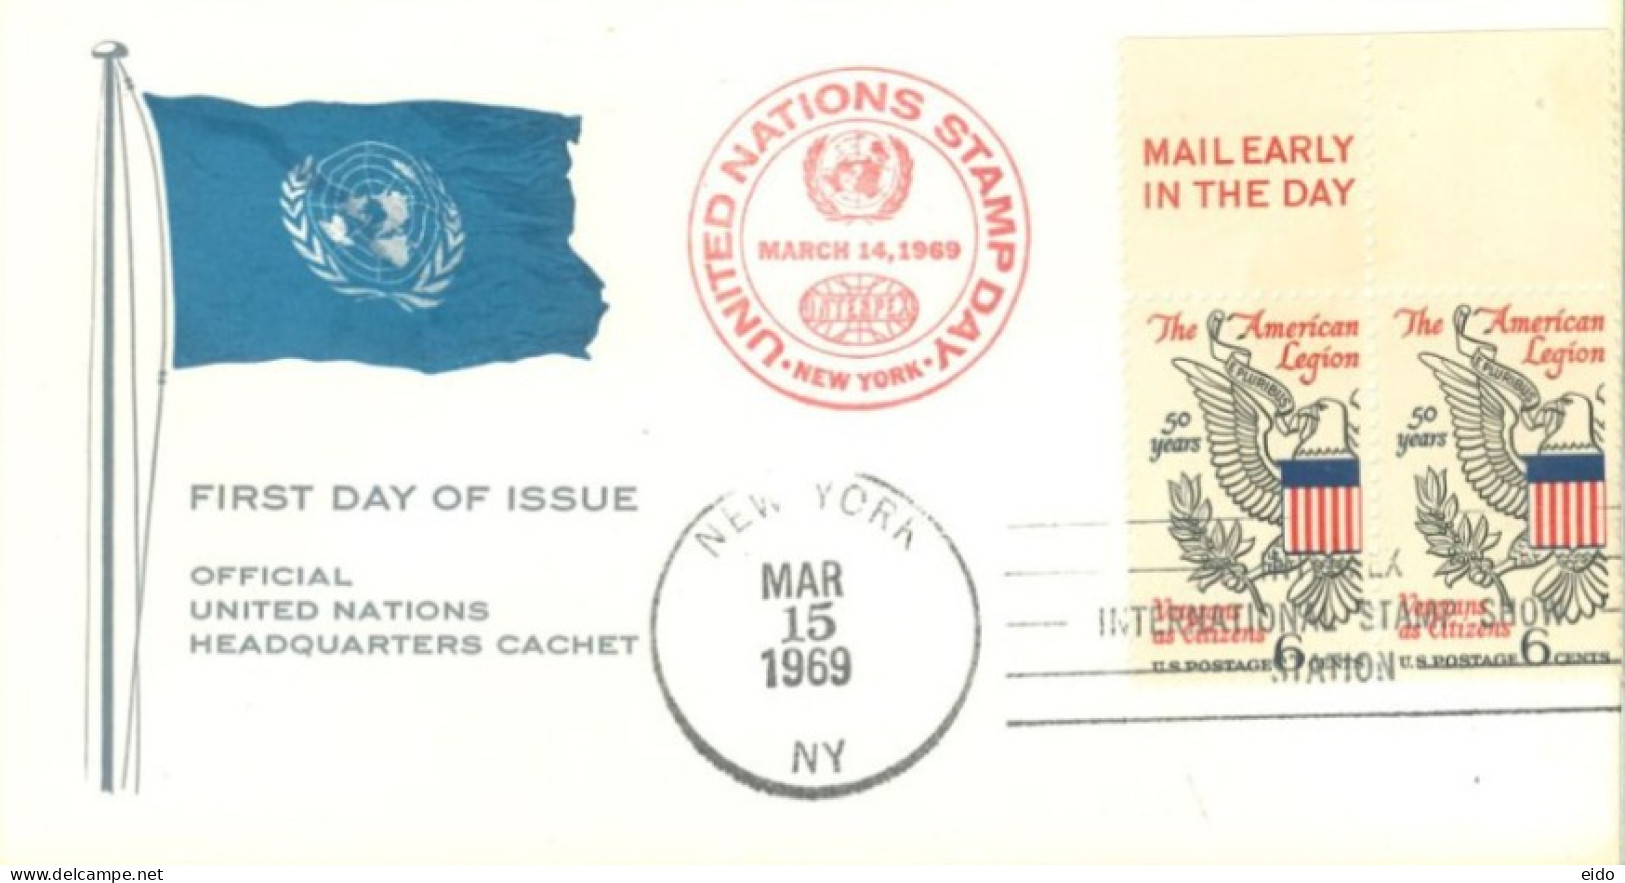 U.S.A.. -1969 -  FDC STAMPS OF OFFICIAL UNITED NATIONS HEADQUARTERS CACHET. - Covers & Documents